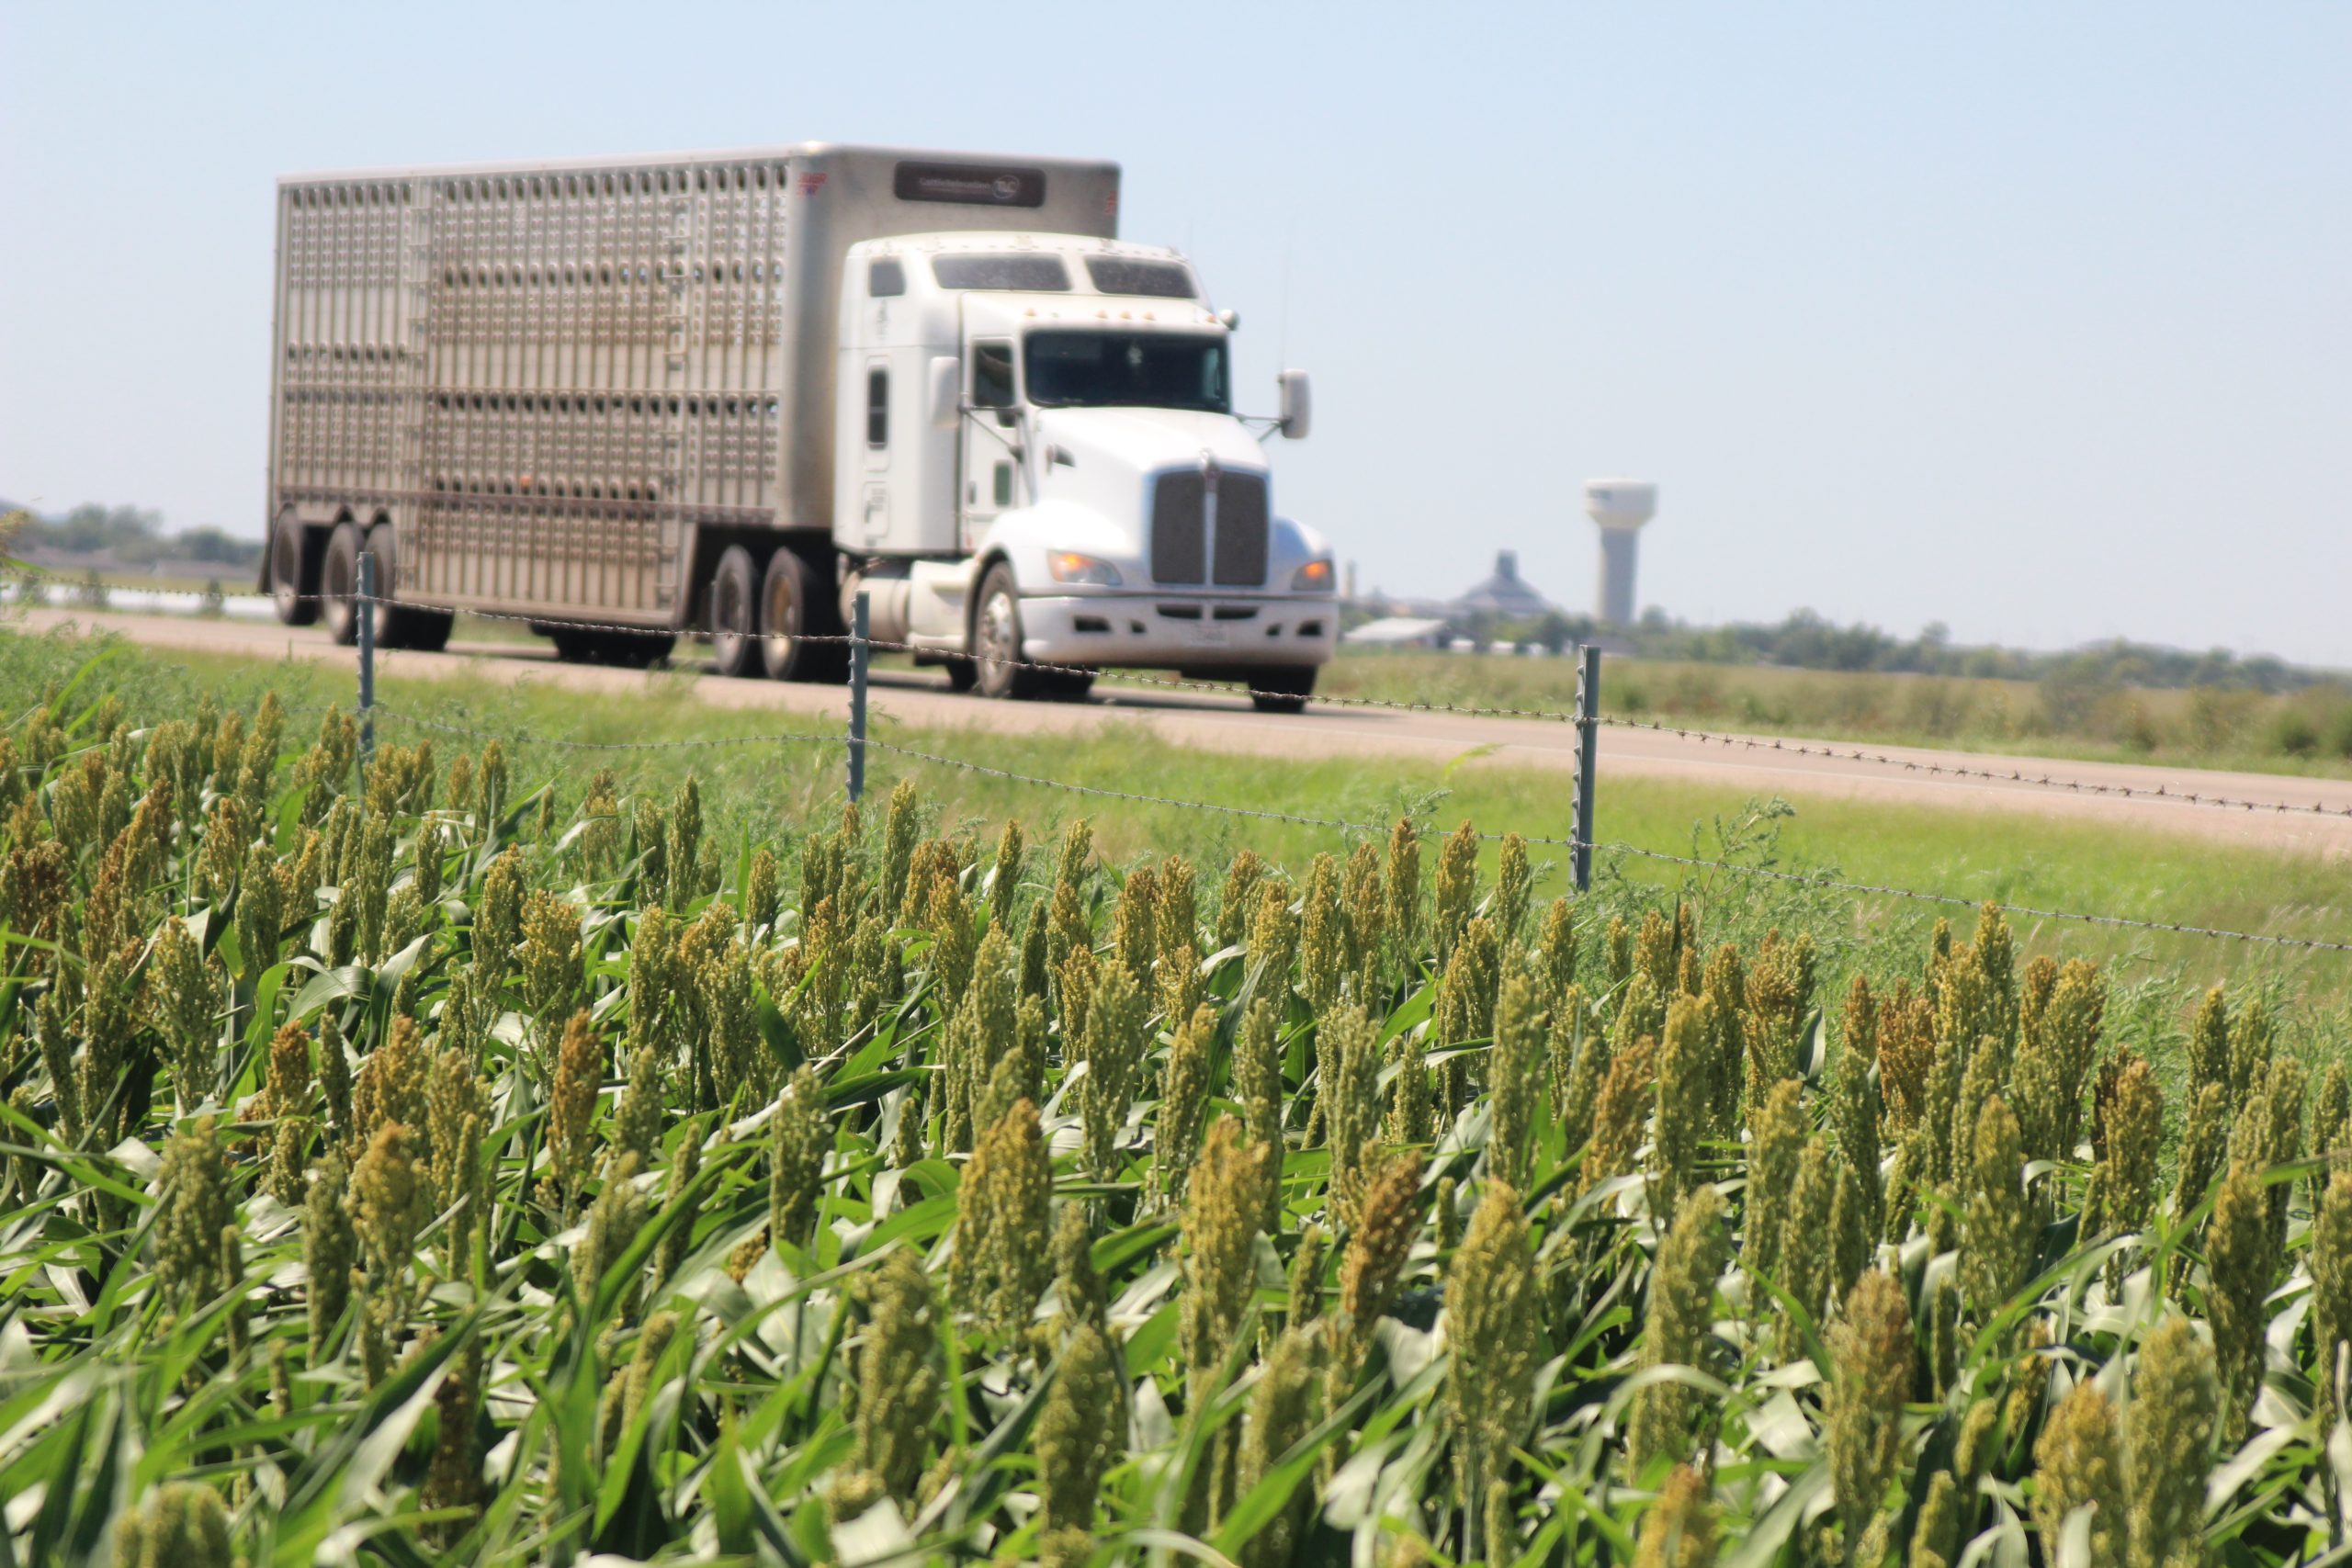 Sorghum is an ideal crop for High Plains agriculture and recently a commitment to more research into millet is expected to help farmers and ranchers. (Journal photo by Dave Bergmeier.)